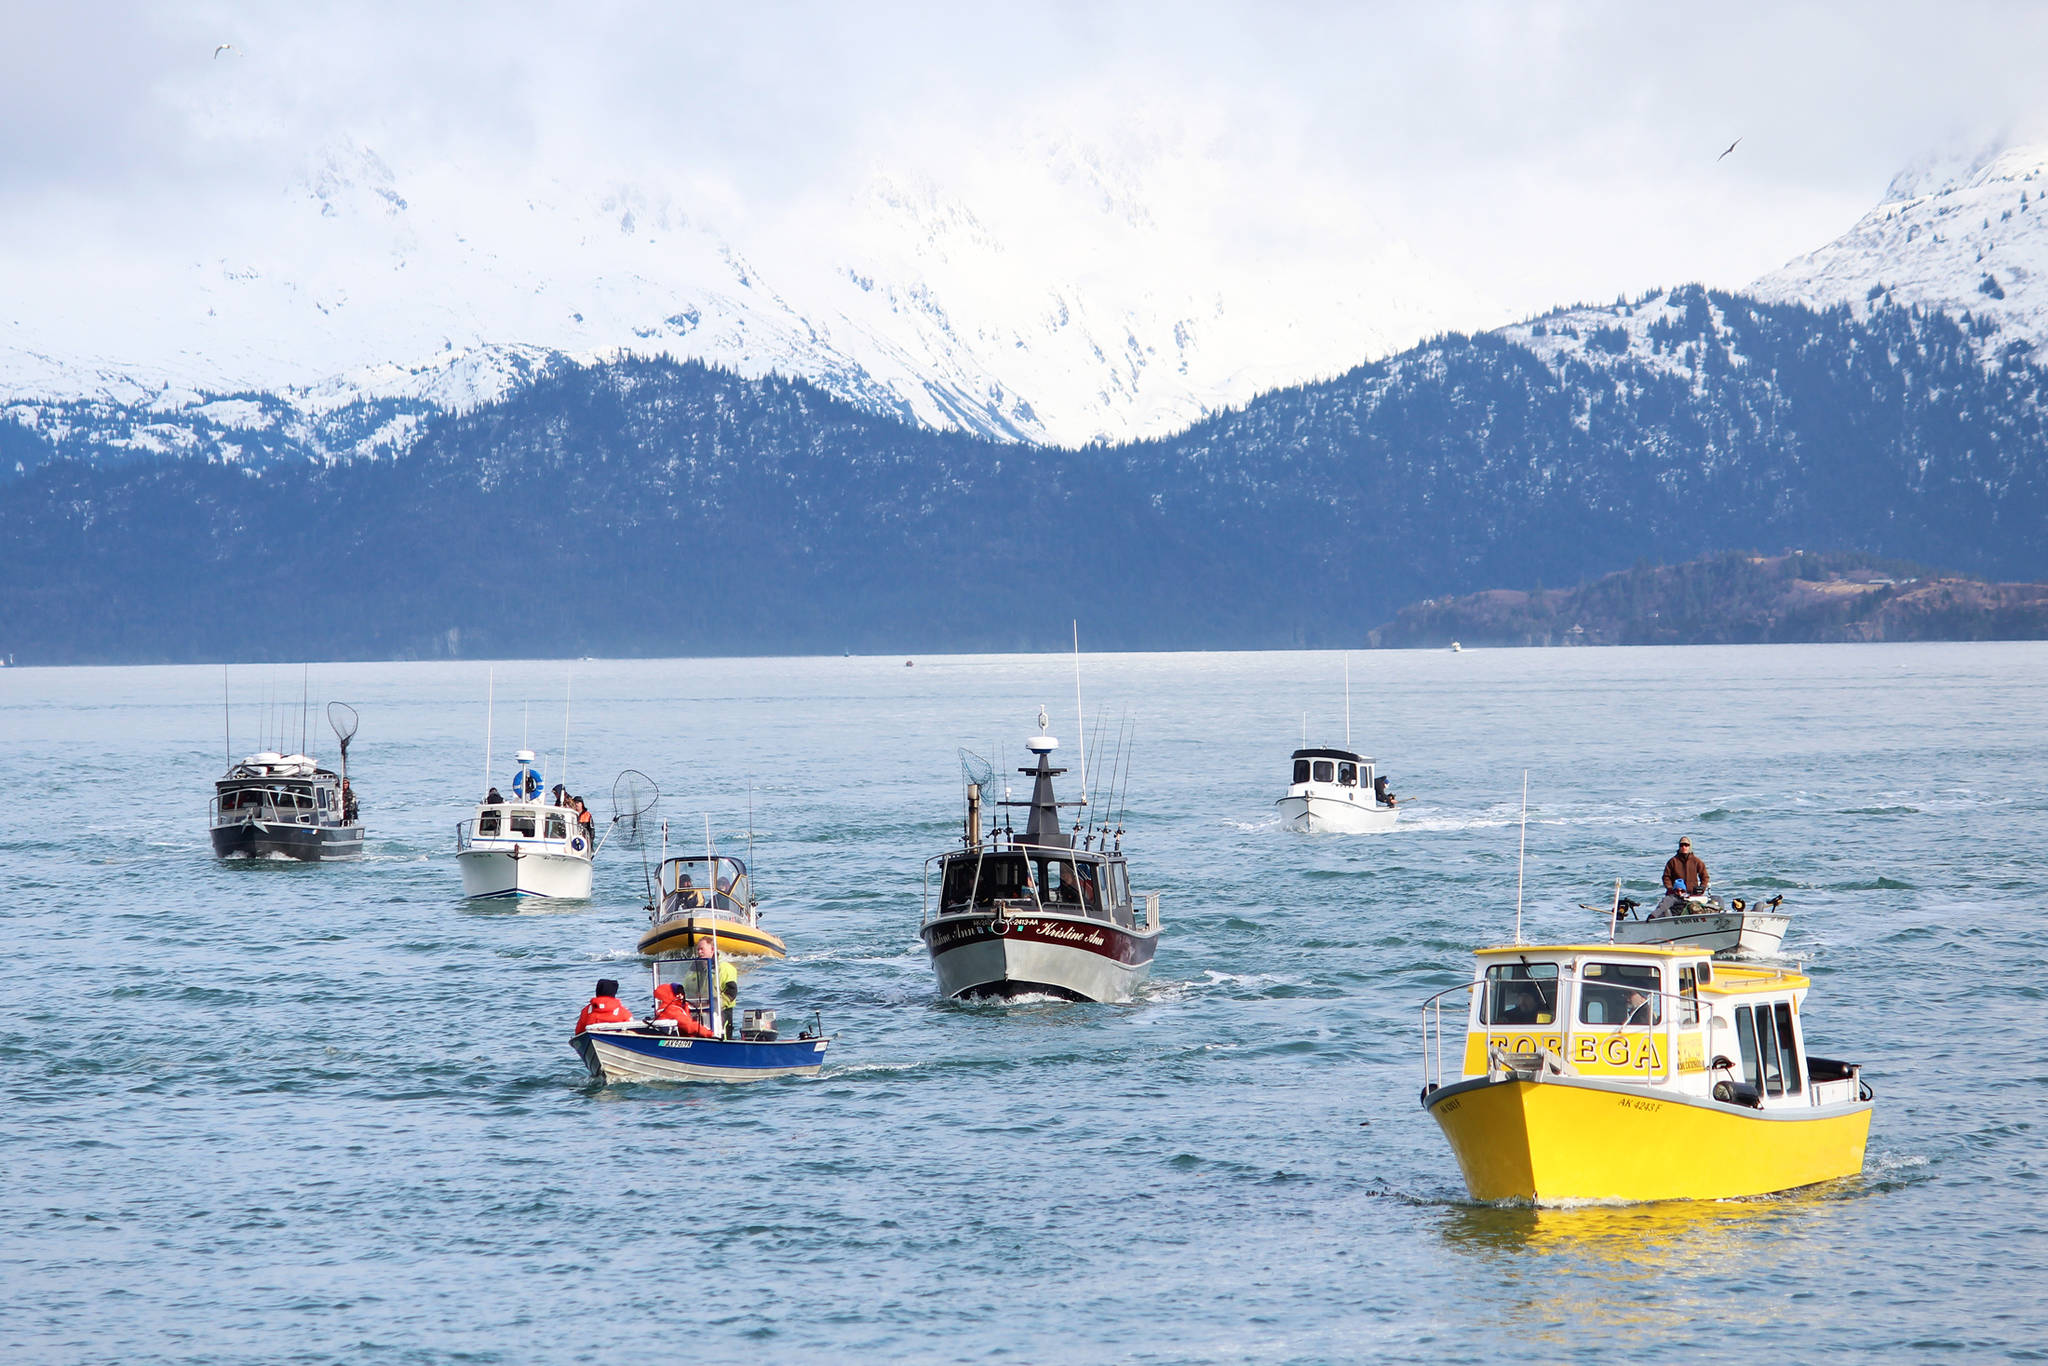 Anglers return in their boats to the Homer Harbor from Kachemak Bay at the end of the Homer Winter King Salmon Tournament held Saturday, March 23, 2019 in Homer, Alaska. (Photo by Megan Pacer/Homer News)